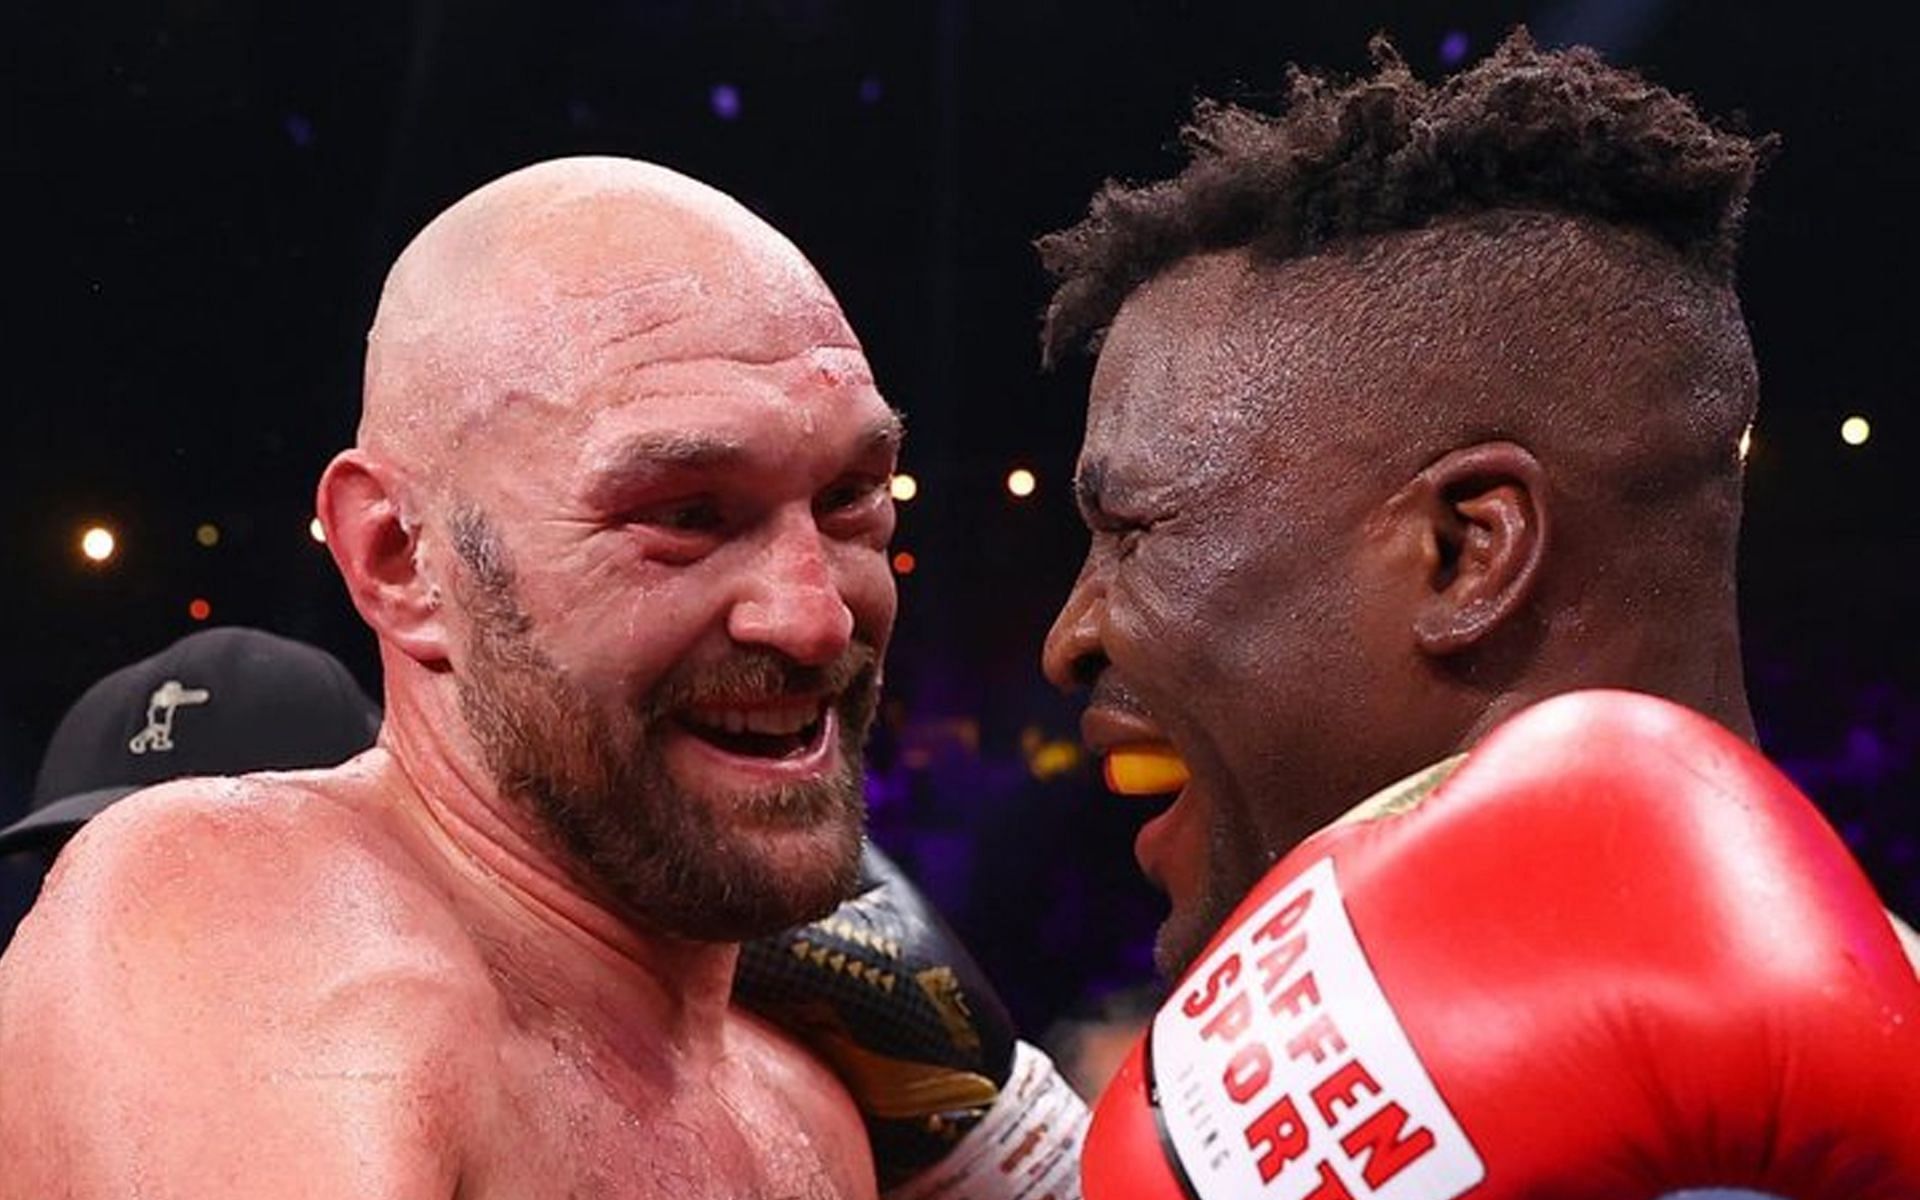 Tyson Fury (left) and Francis Ngannou (right) after their fight (Image via @Randy_Couture X)